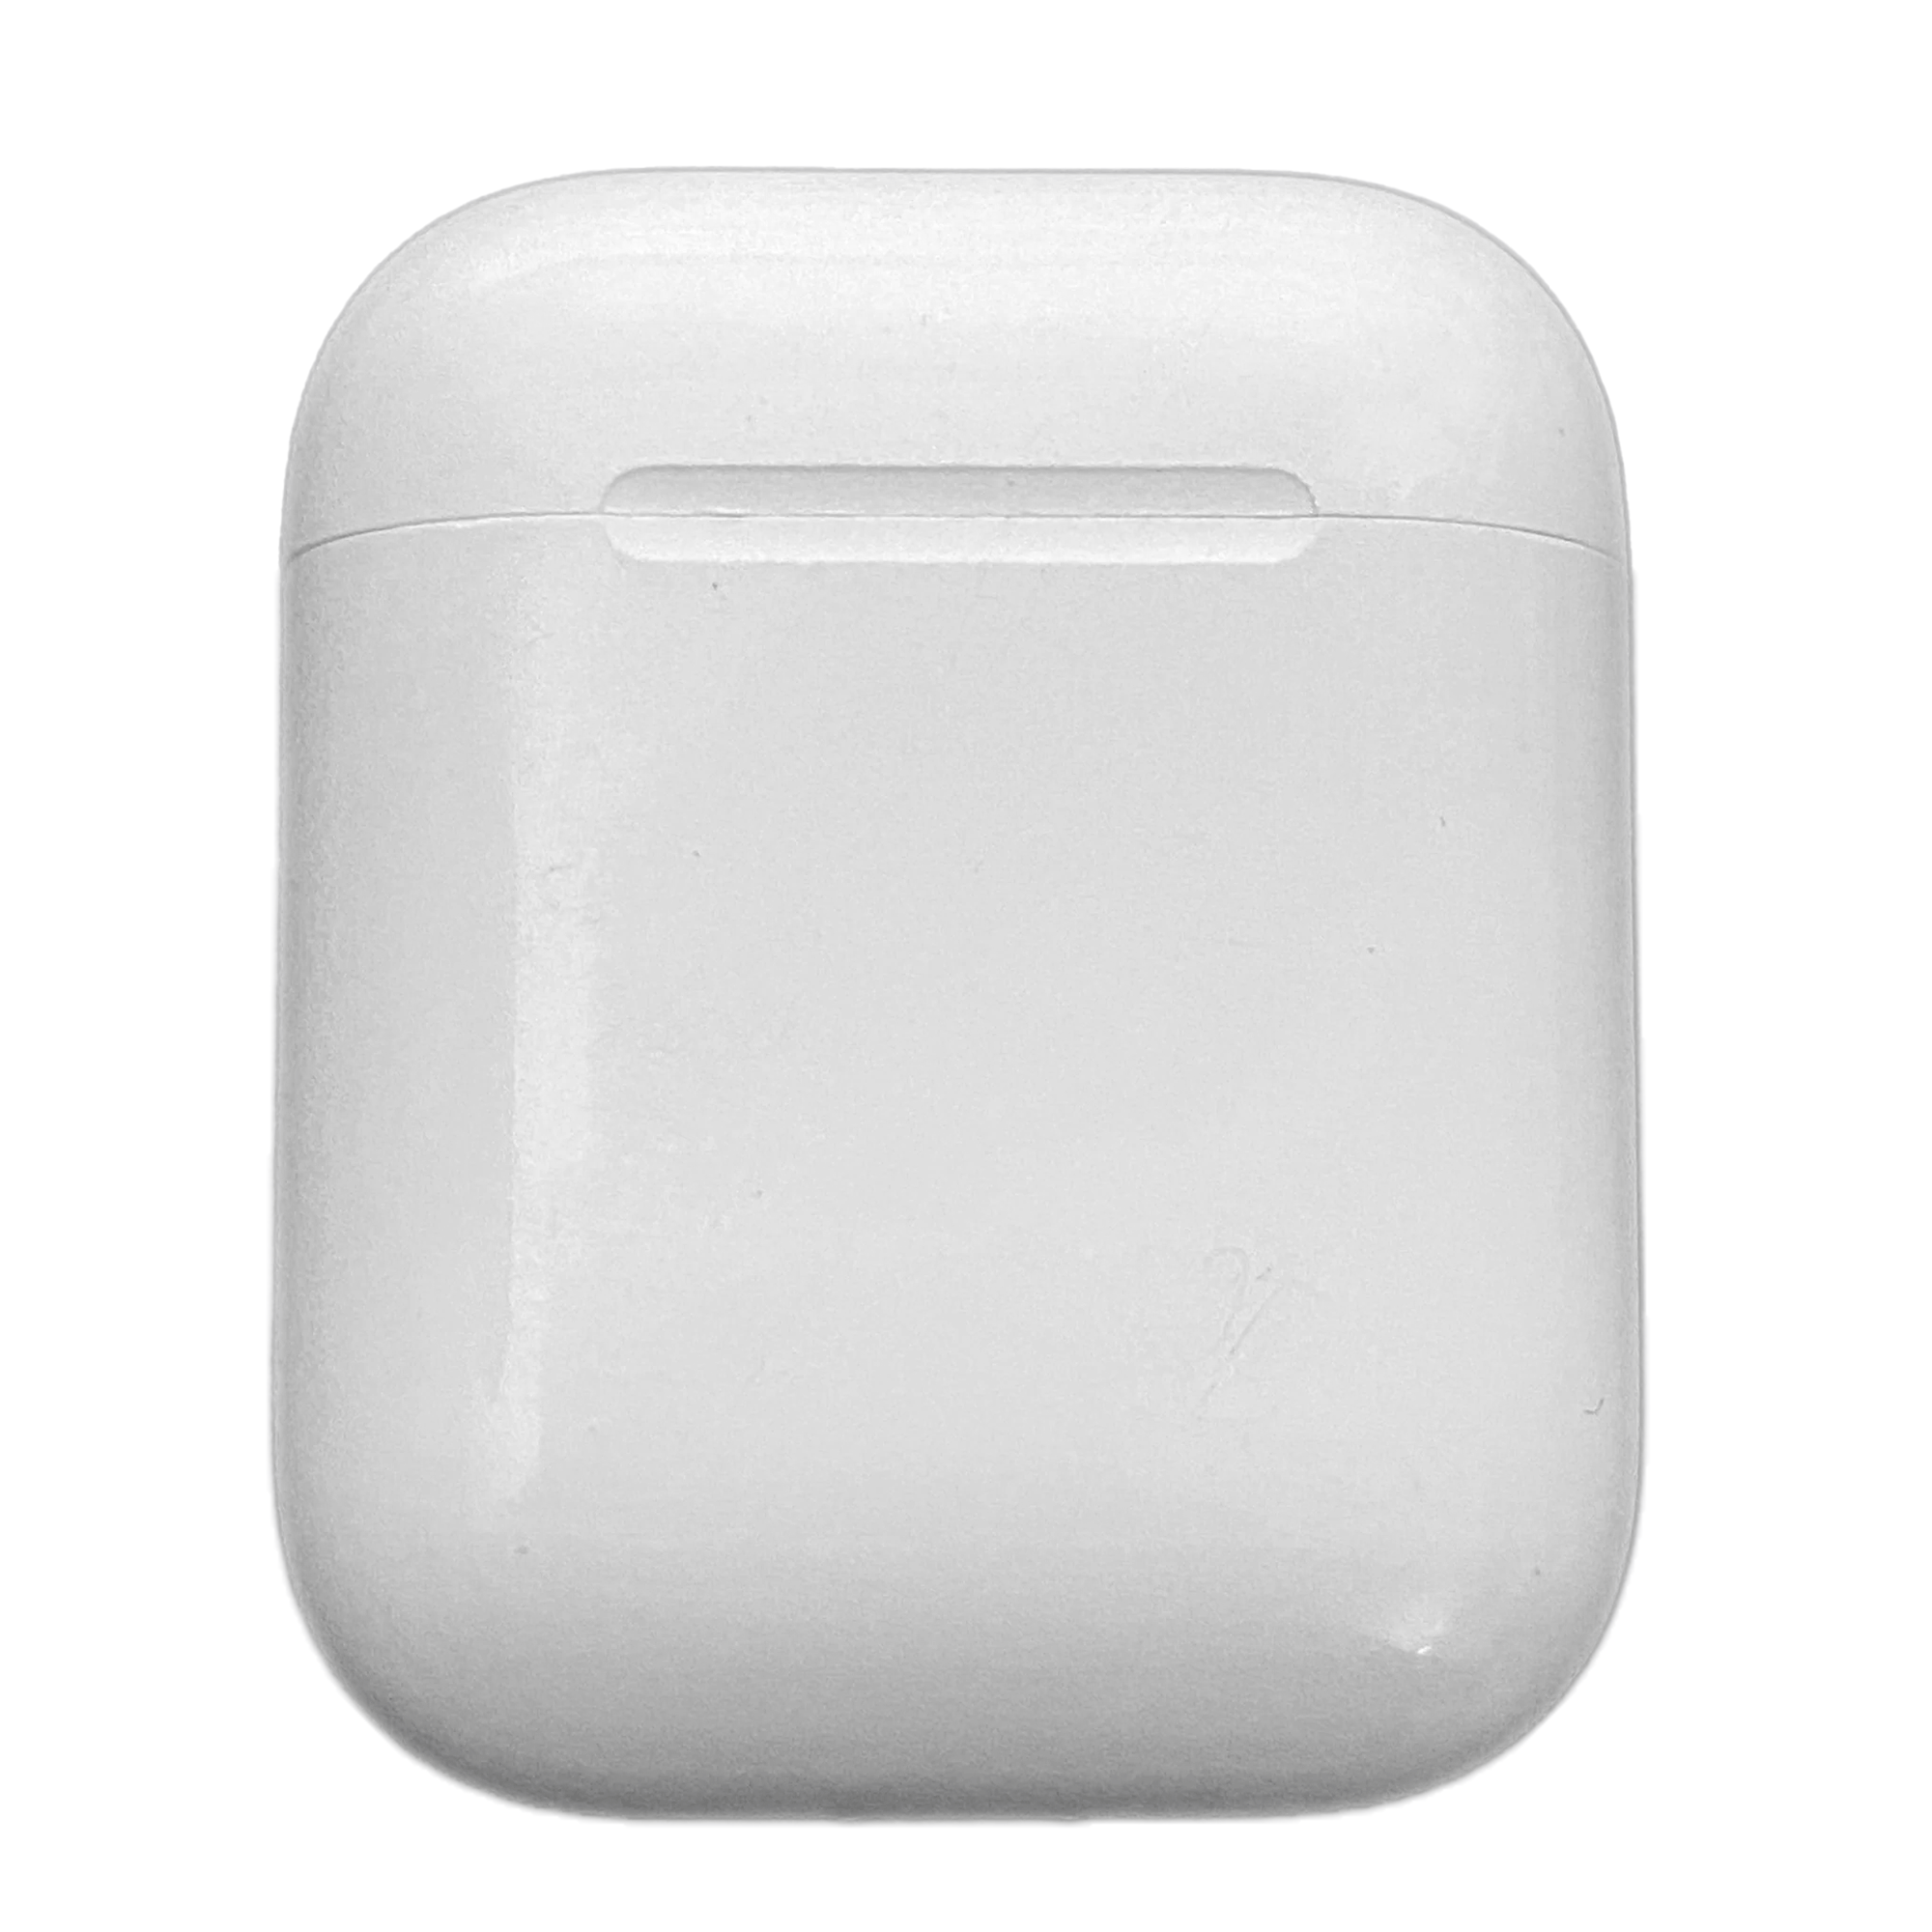 AirPods 2nd Gen Charging Case Replacement (A1602)